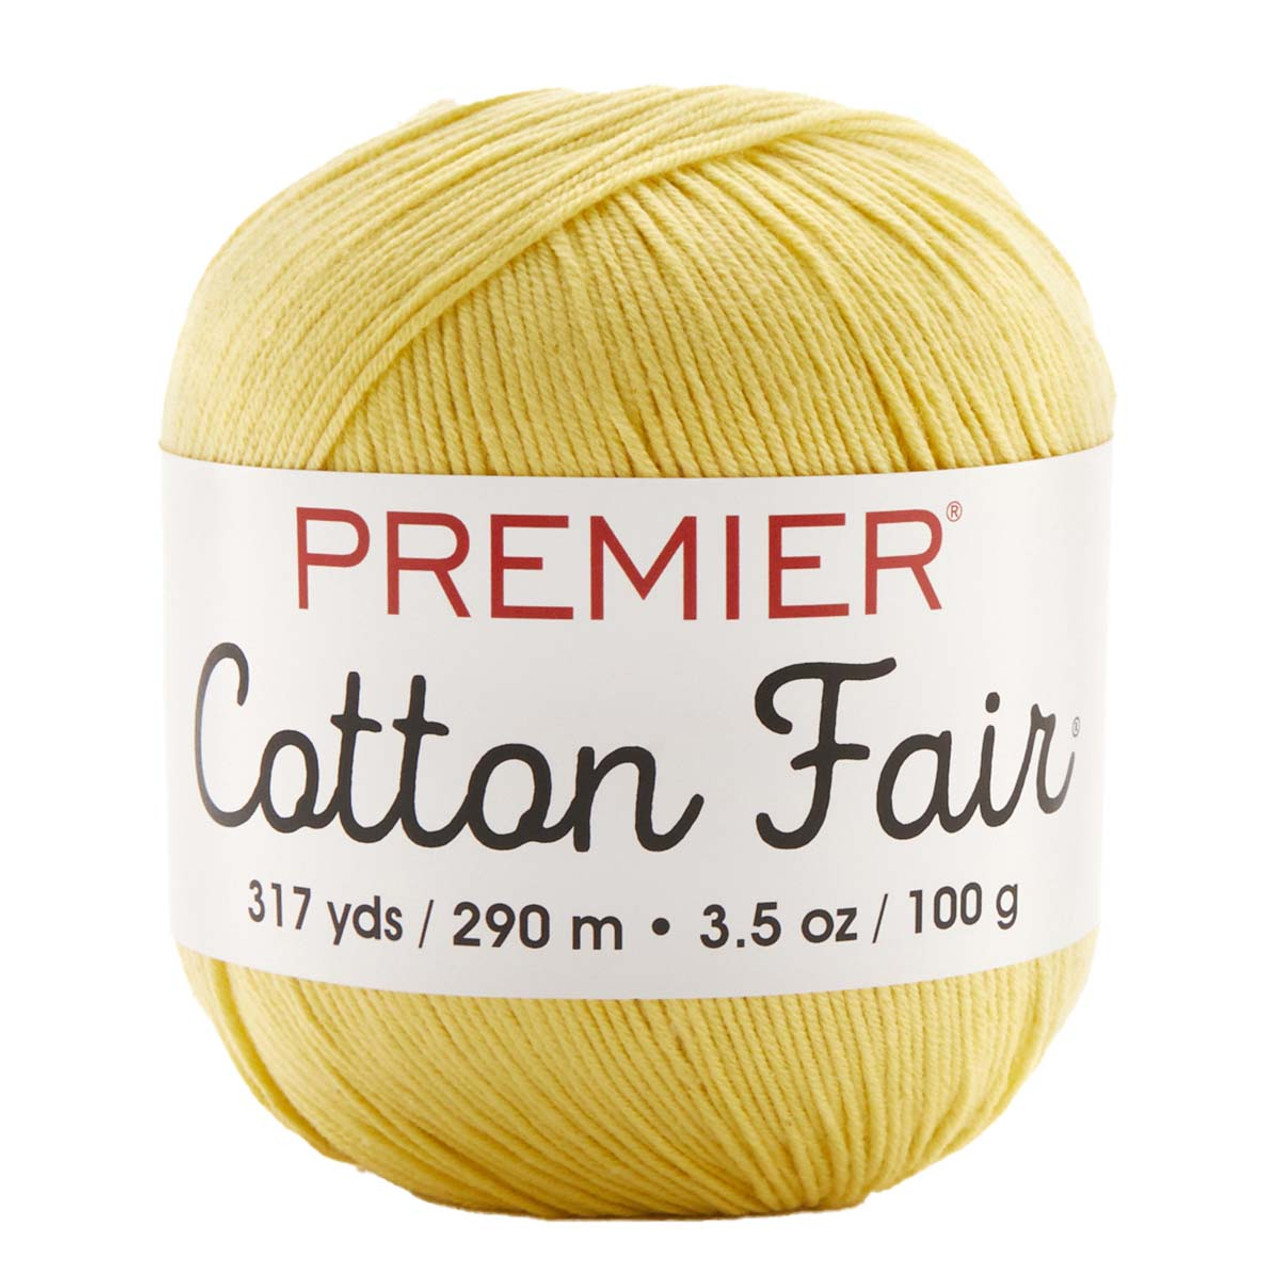 Premier Home Cotton Yarn - Solid-Pastel Pink